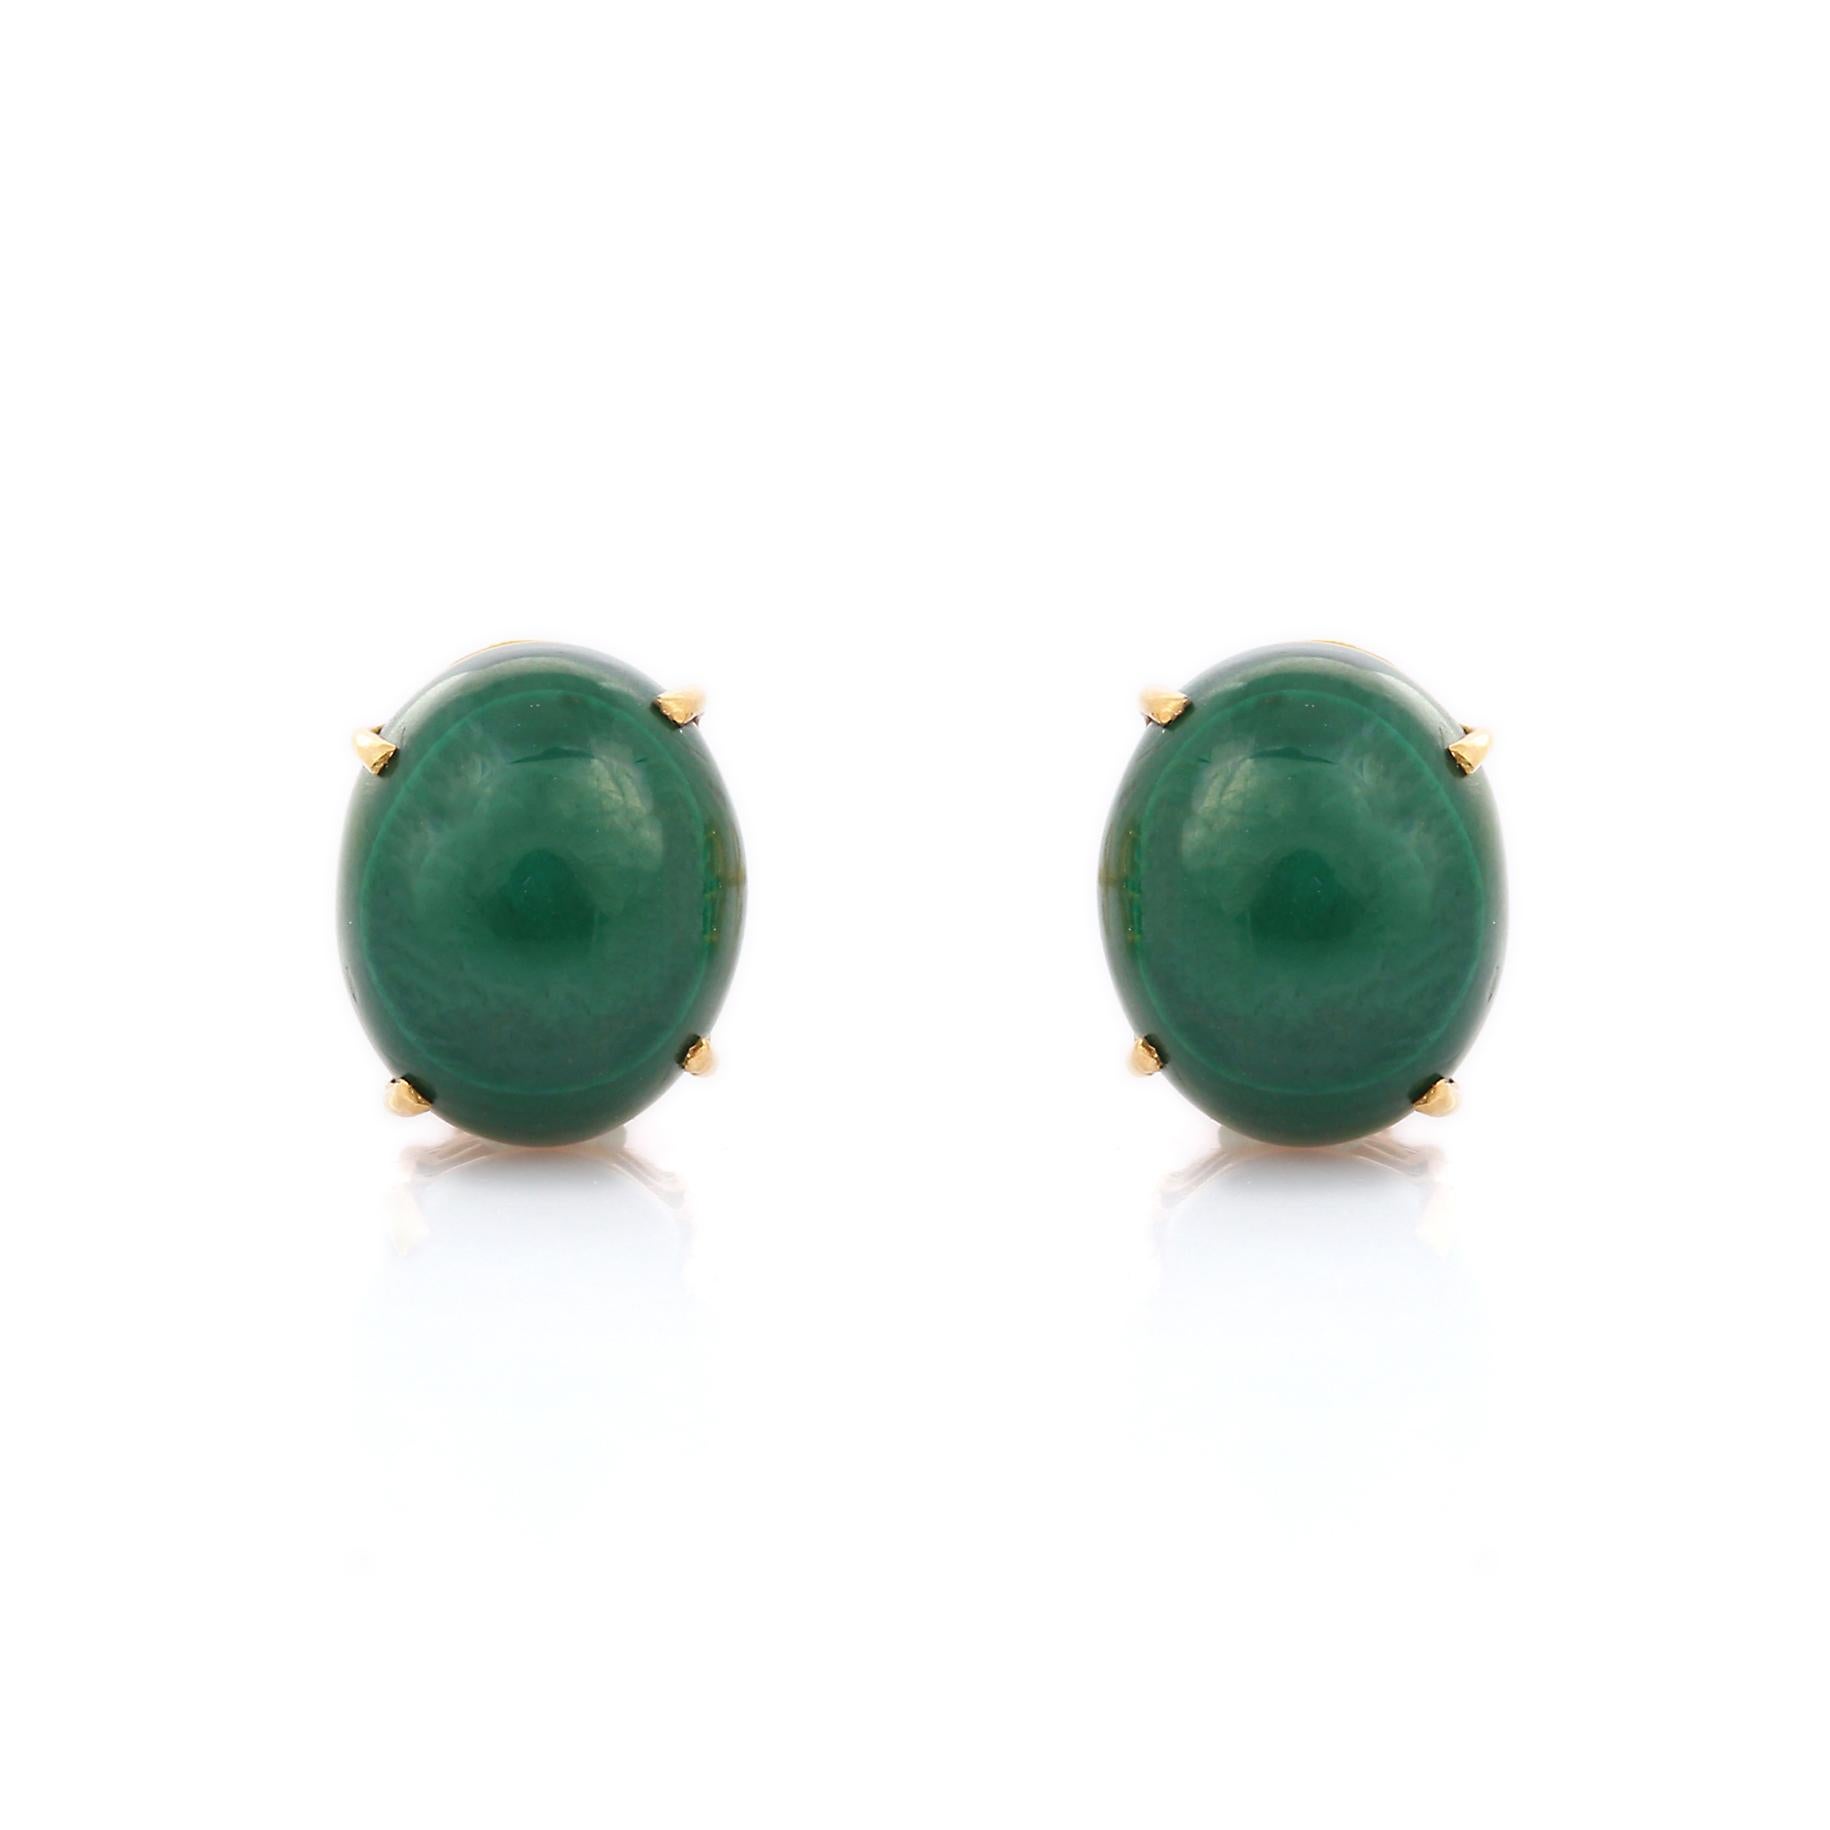 Earrings create a subtle beauty while showcasing the colors of the natural precious gemstones and illuminating diamonds making a statement.

Oval cut Malachite Stud earrings in 18K gold. Embrace your look with these stunning pair of earrings